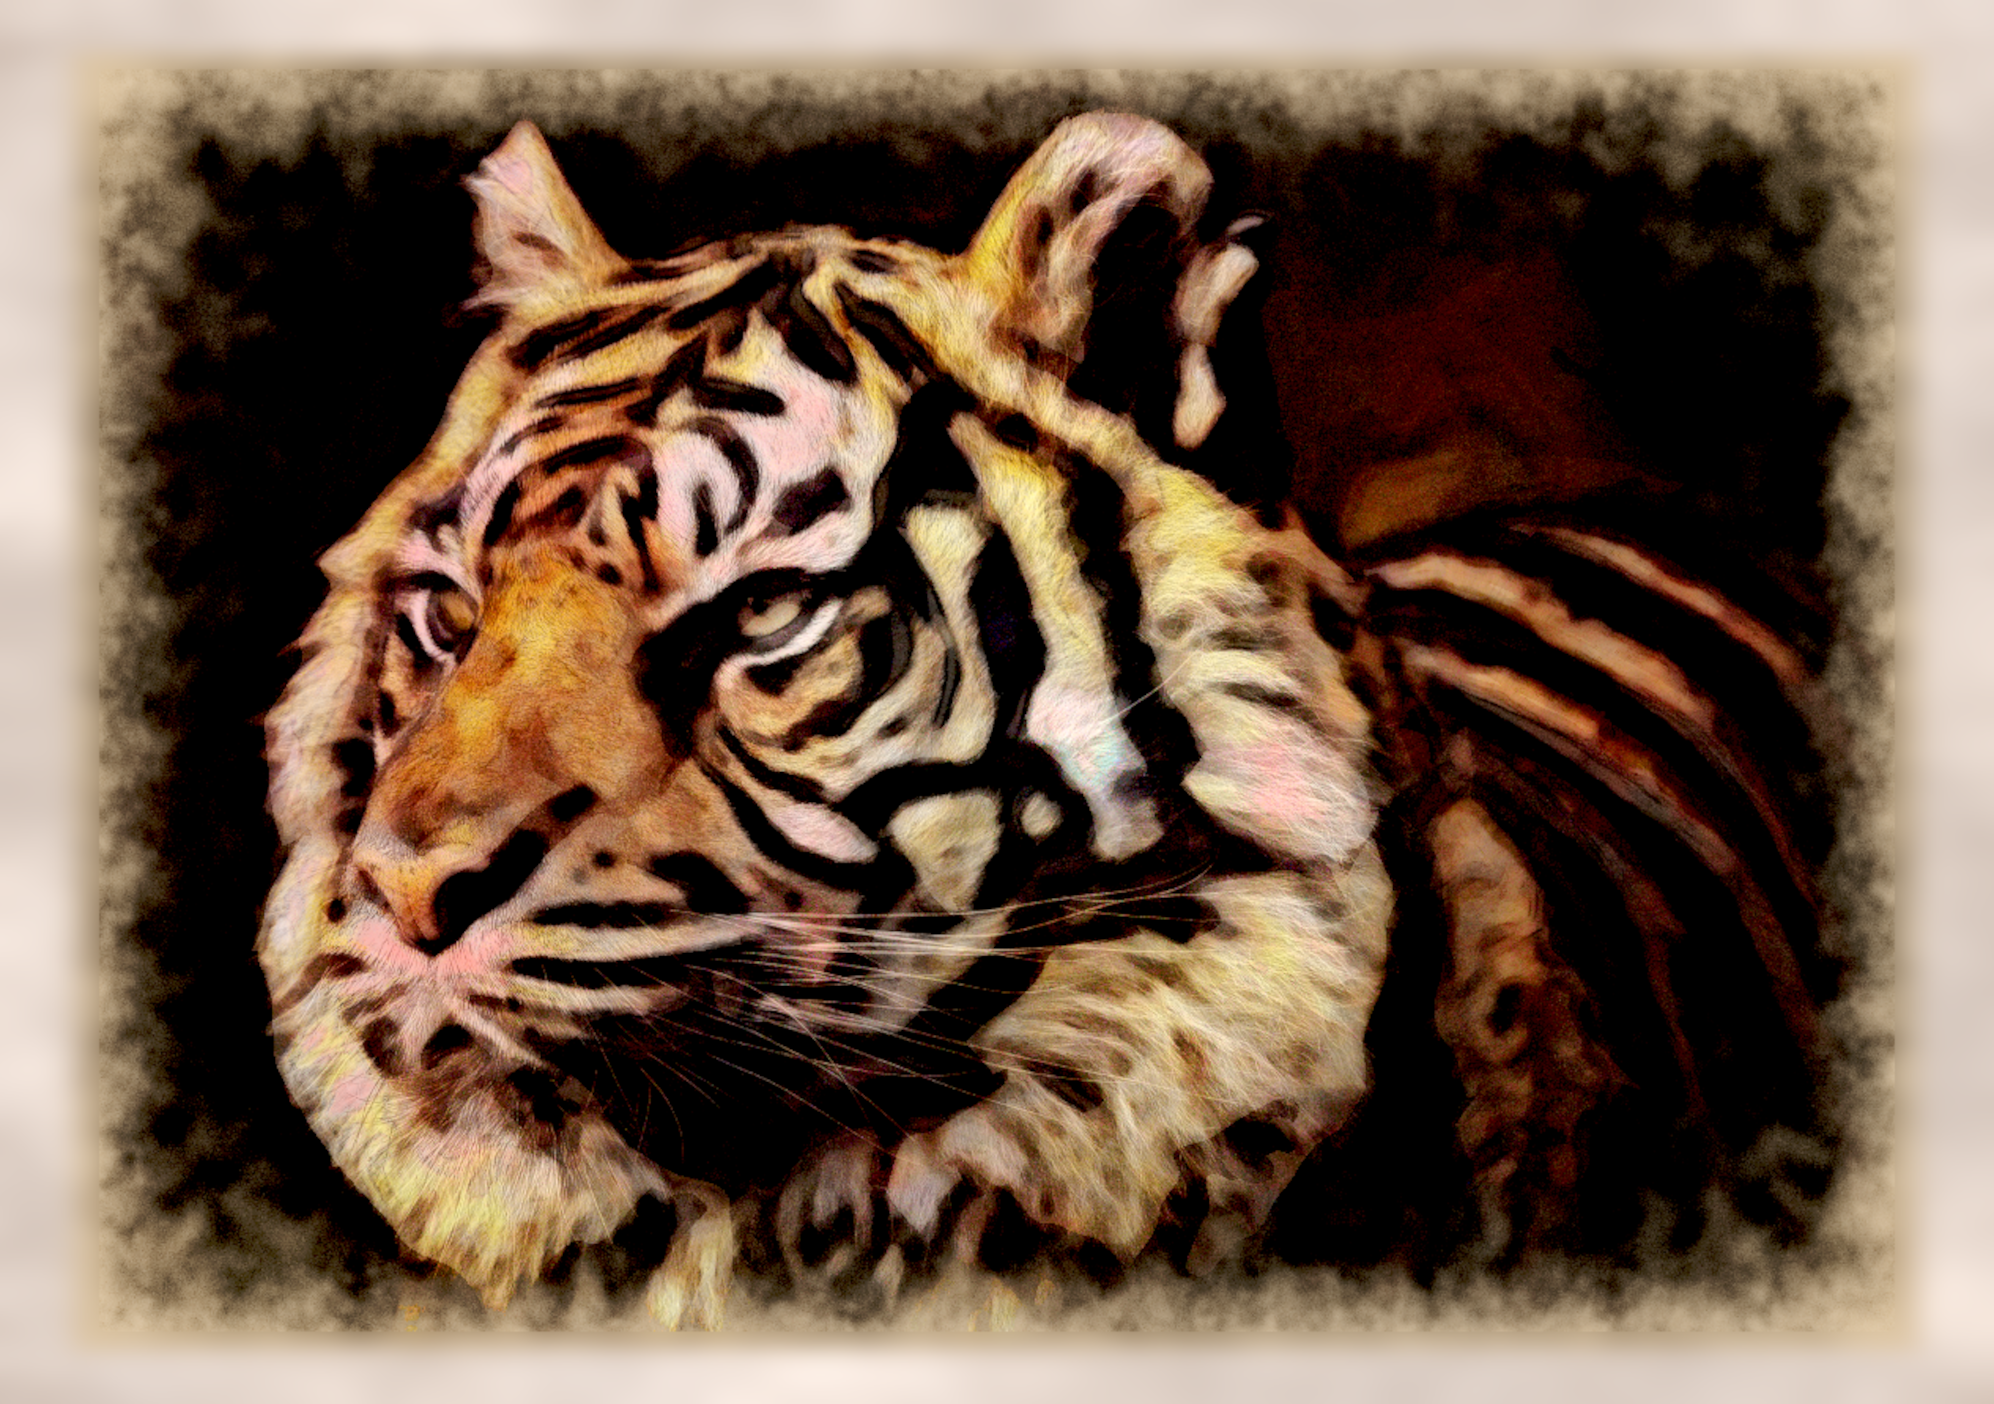 2023-09-29 15-41-32 tiger-8214815 with a Watercolor Pastels Effect 2023 (4.0,75.0,32.0,50.0,20.0,8.0,75.0,False,2).png